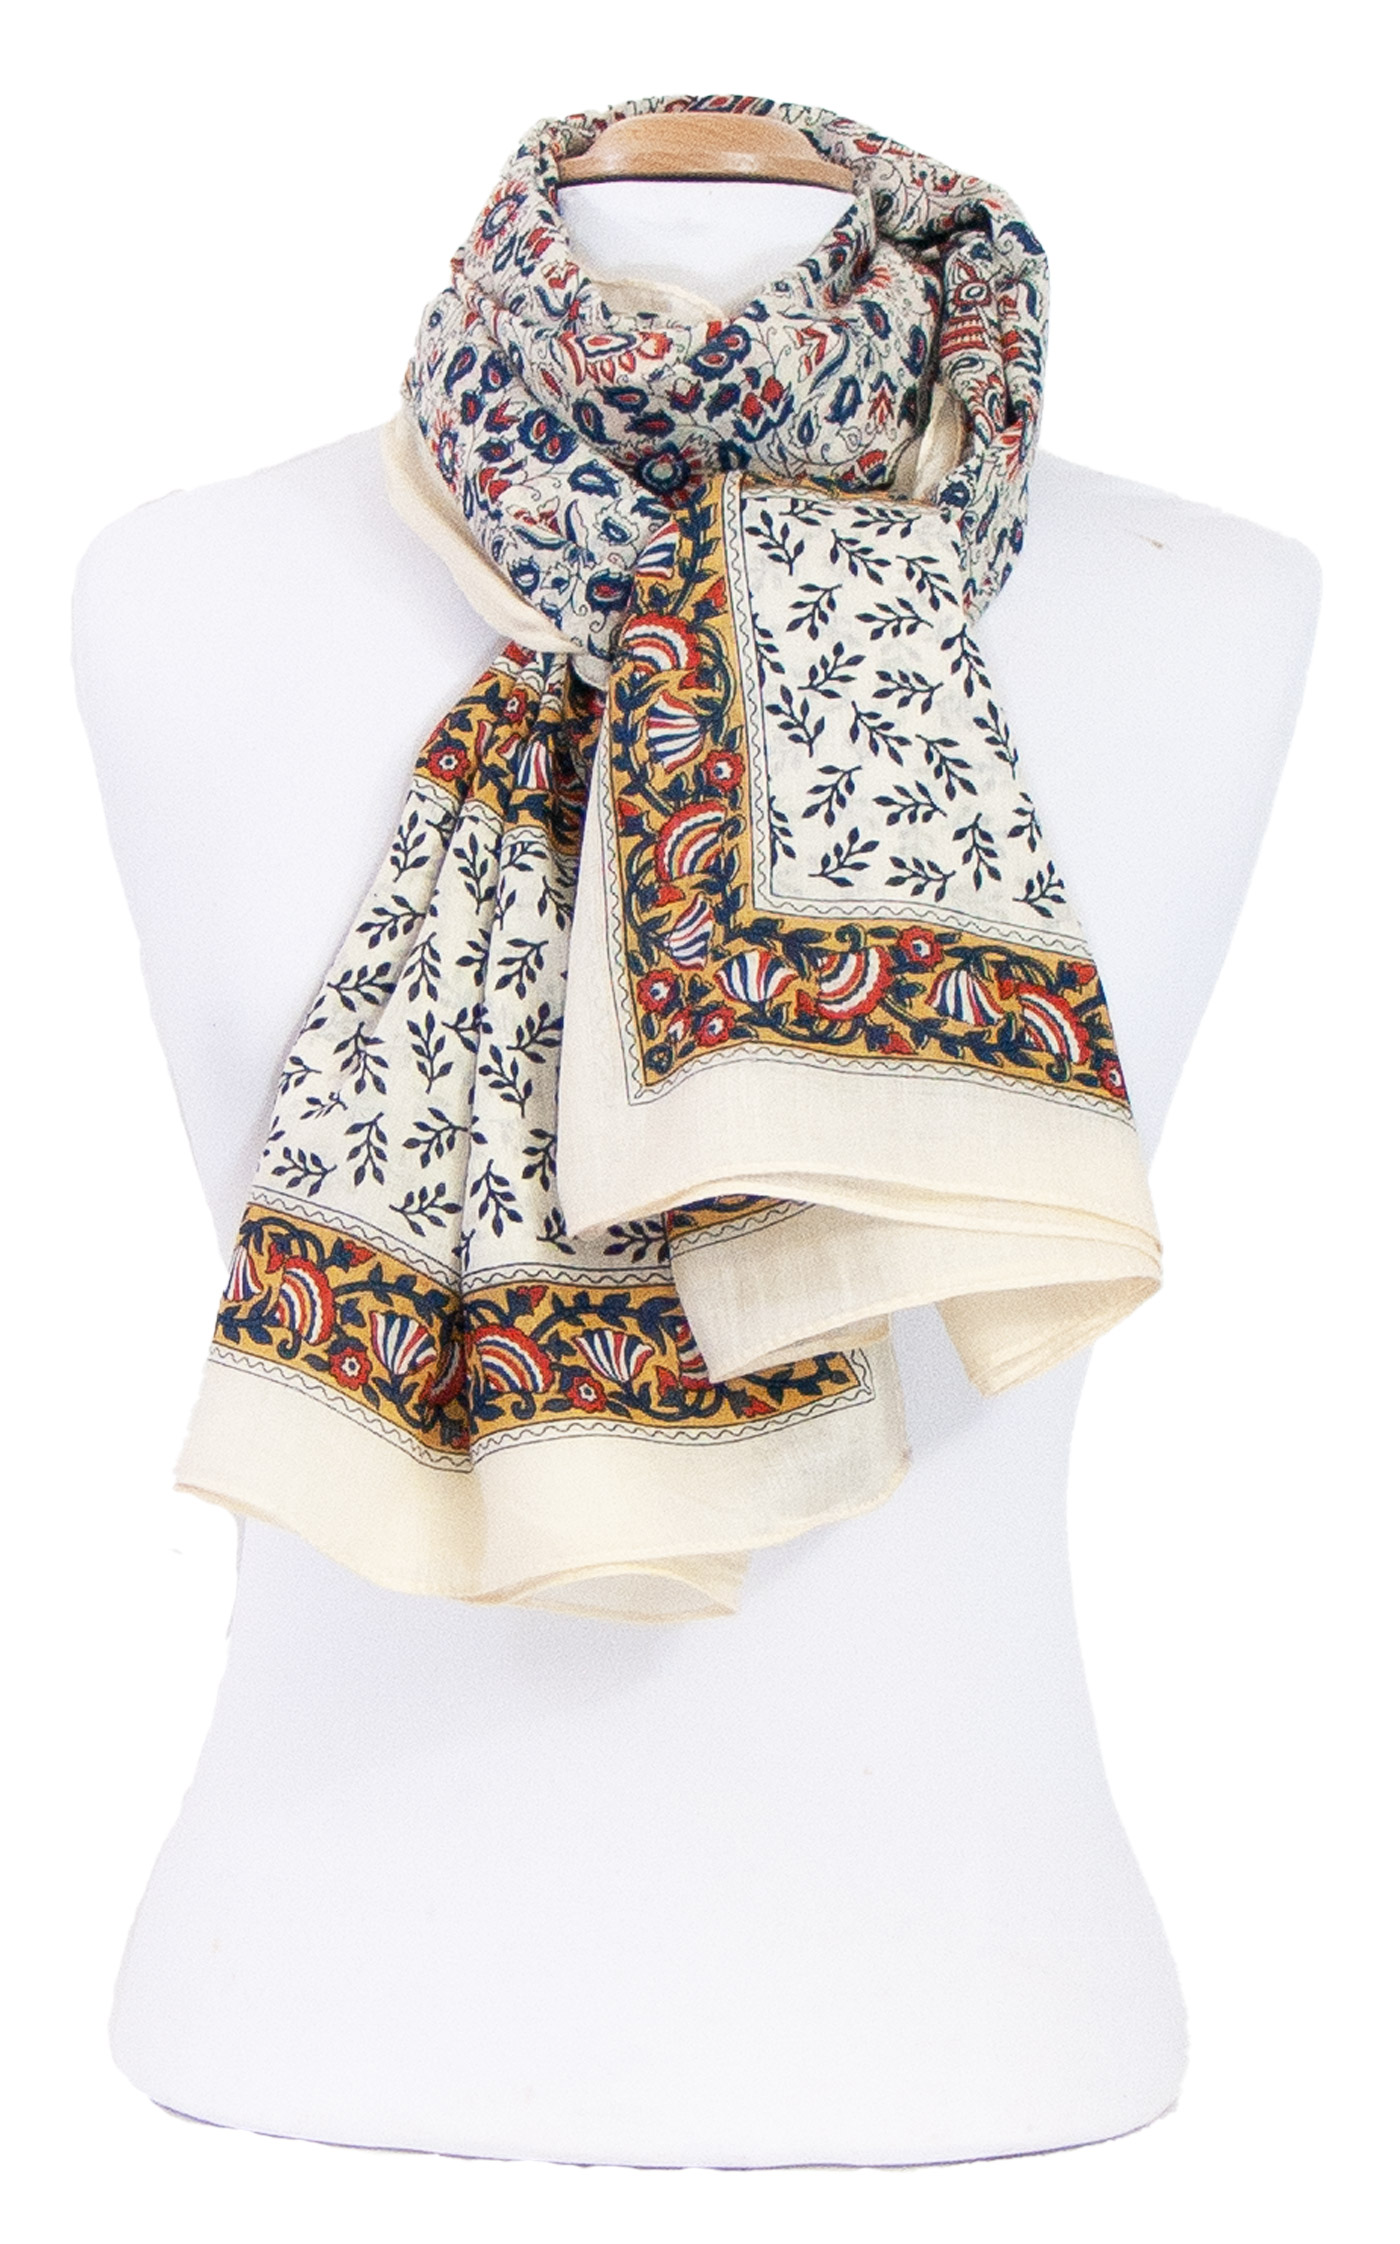 foulard cheche pareo bleu coton traditionnel indien Indiana